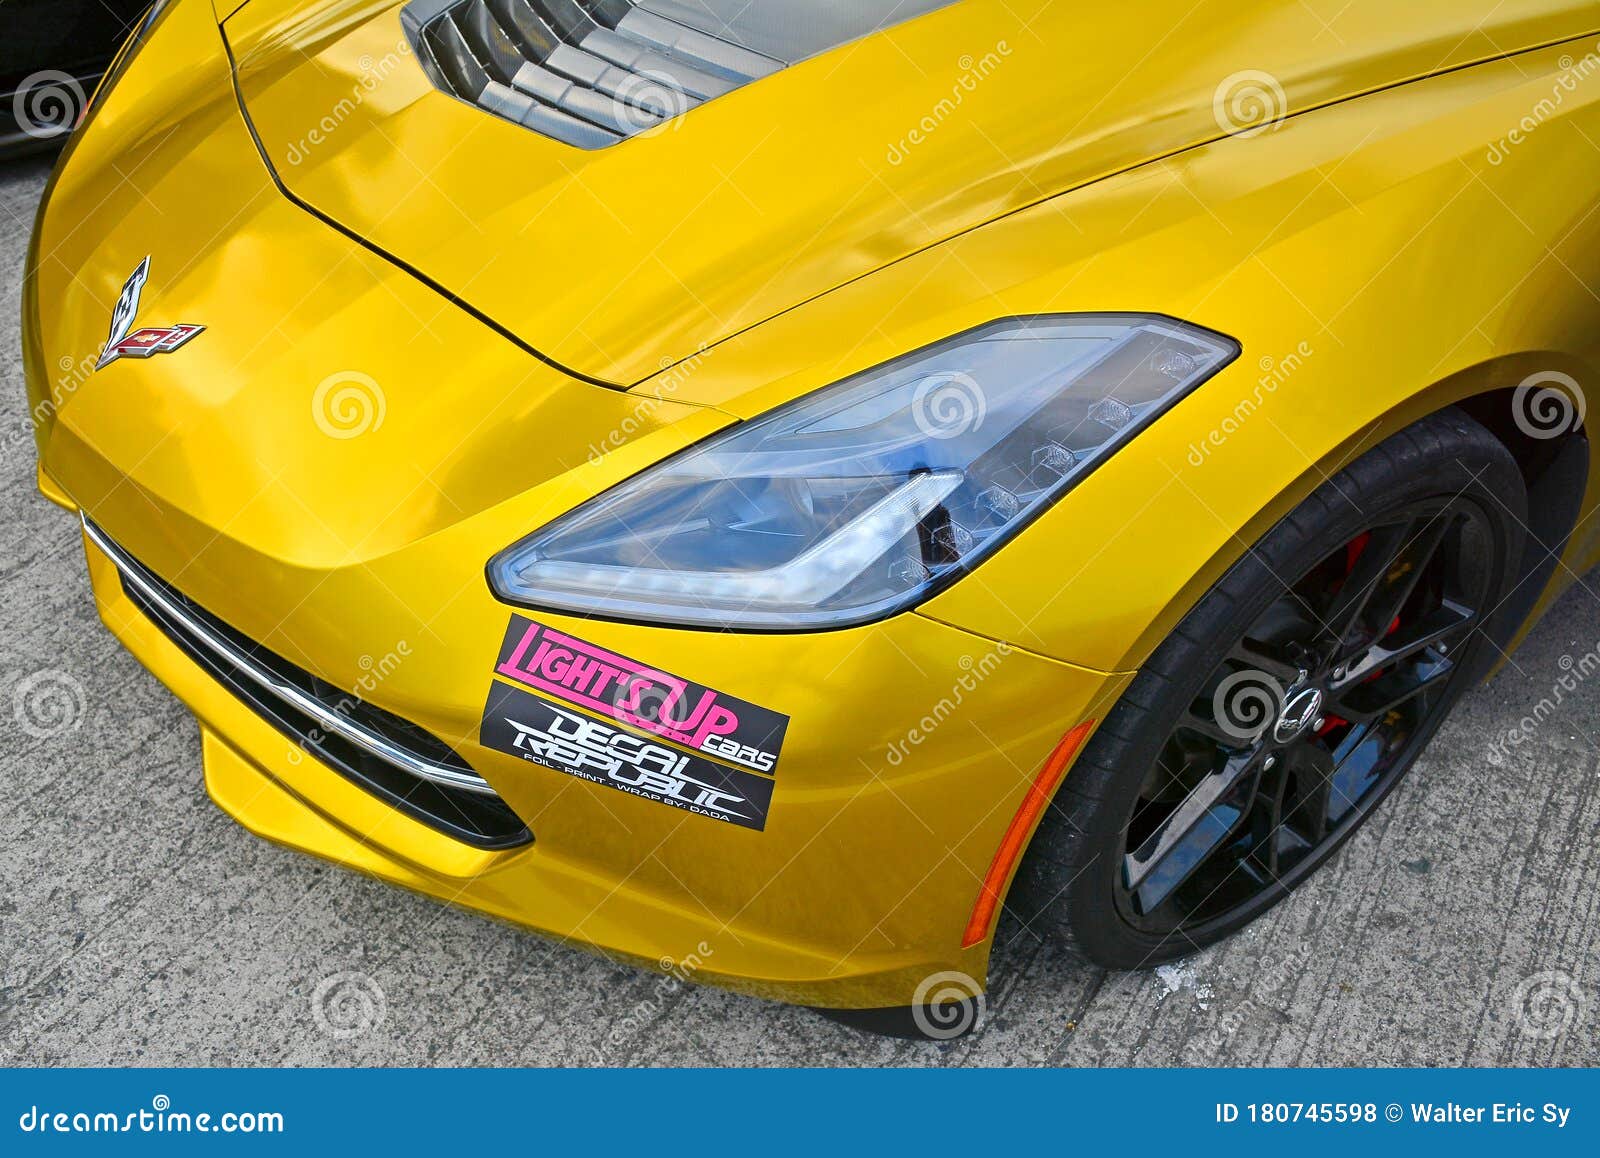 Chevrolet Corvette Stingray At Hot Import Nights Car Show In Pasig Philippines Editorial Stock Photo Image Of Night Business 180745598